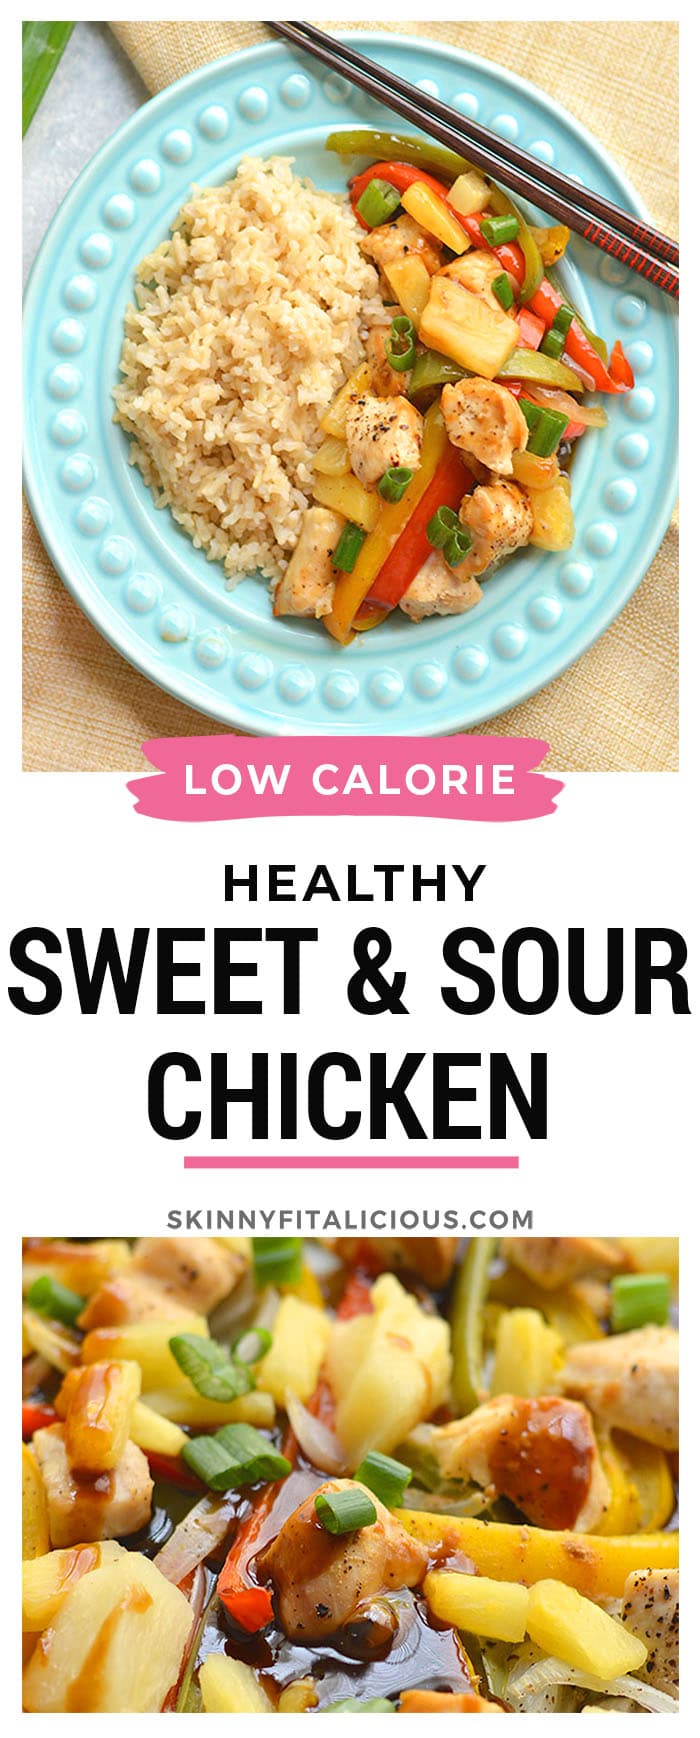 Healthy Sheet Pan Sweet & Sour Chicken is soy free, baked to perfection on a sheet pan in 20-minutes. A quick and easy meal that's a healthier version of take-out! Pair with brown or cauliflower rice for a complete meal.